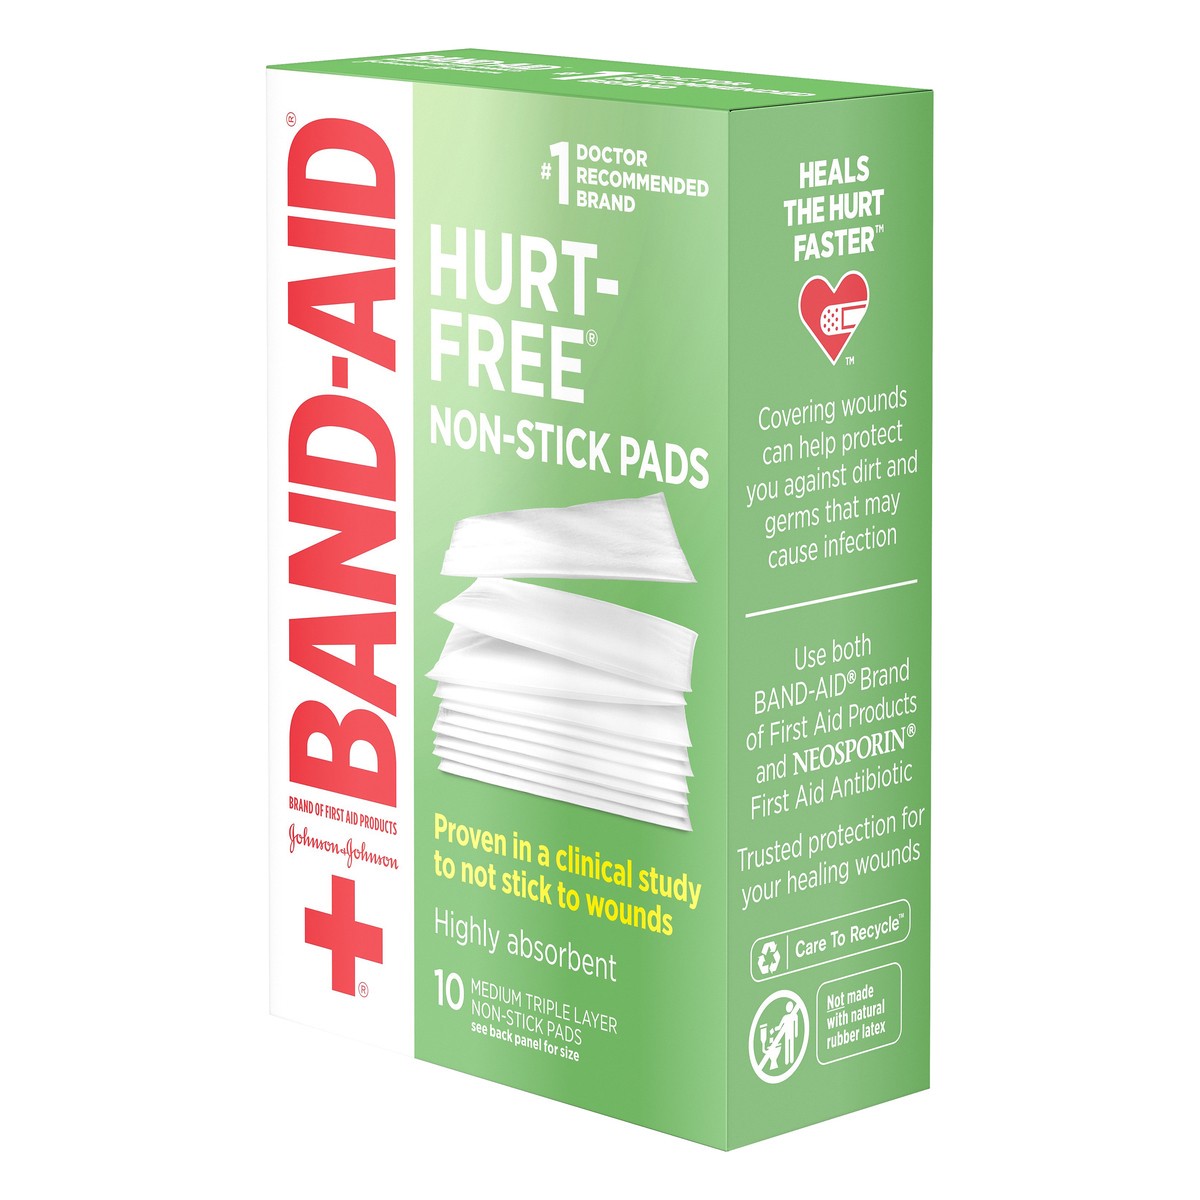 slide 4 of 7, BAND-AID Hurt-Free Non-Stick Pads with Hurt-Free Design for Wound Care & Wound Protection, Highly-Absorbent Individually-Wrapped Sterile Pads, Medium Size, 2 inches x 3 inches, 10 ct, 10 ct